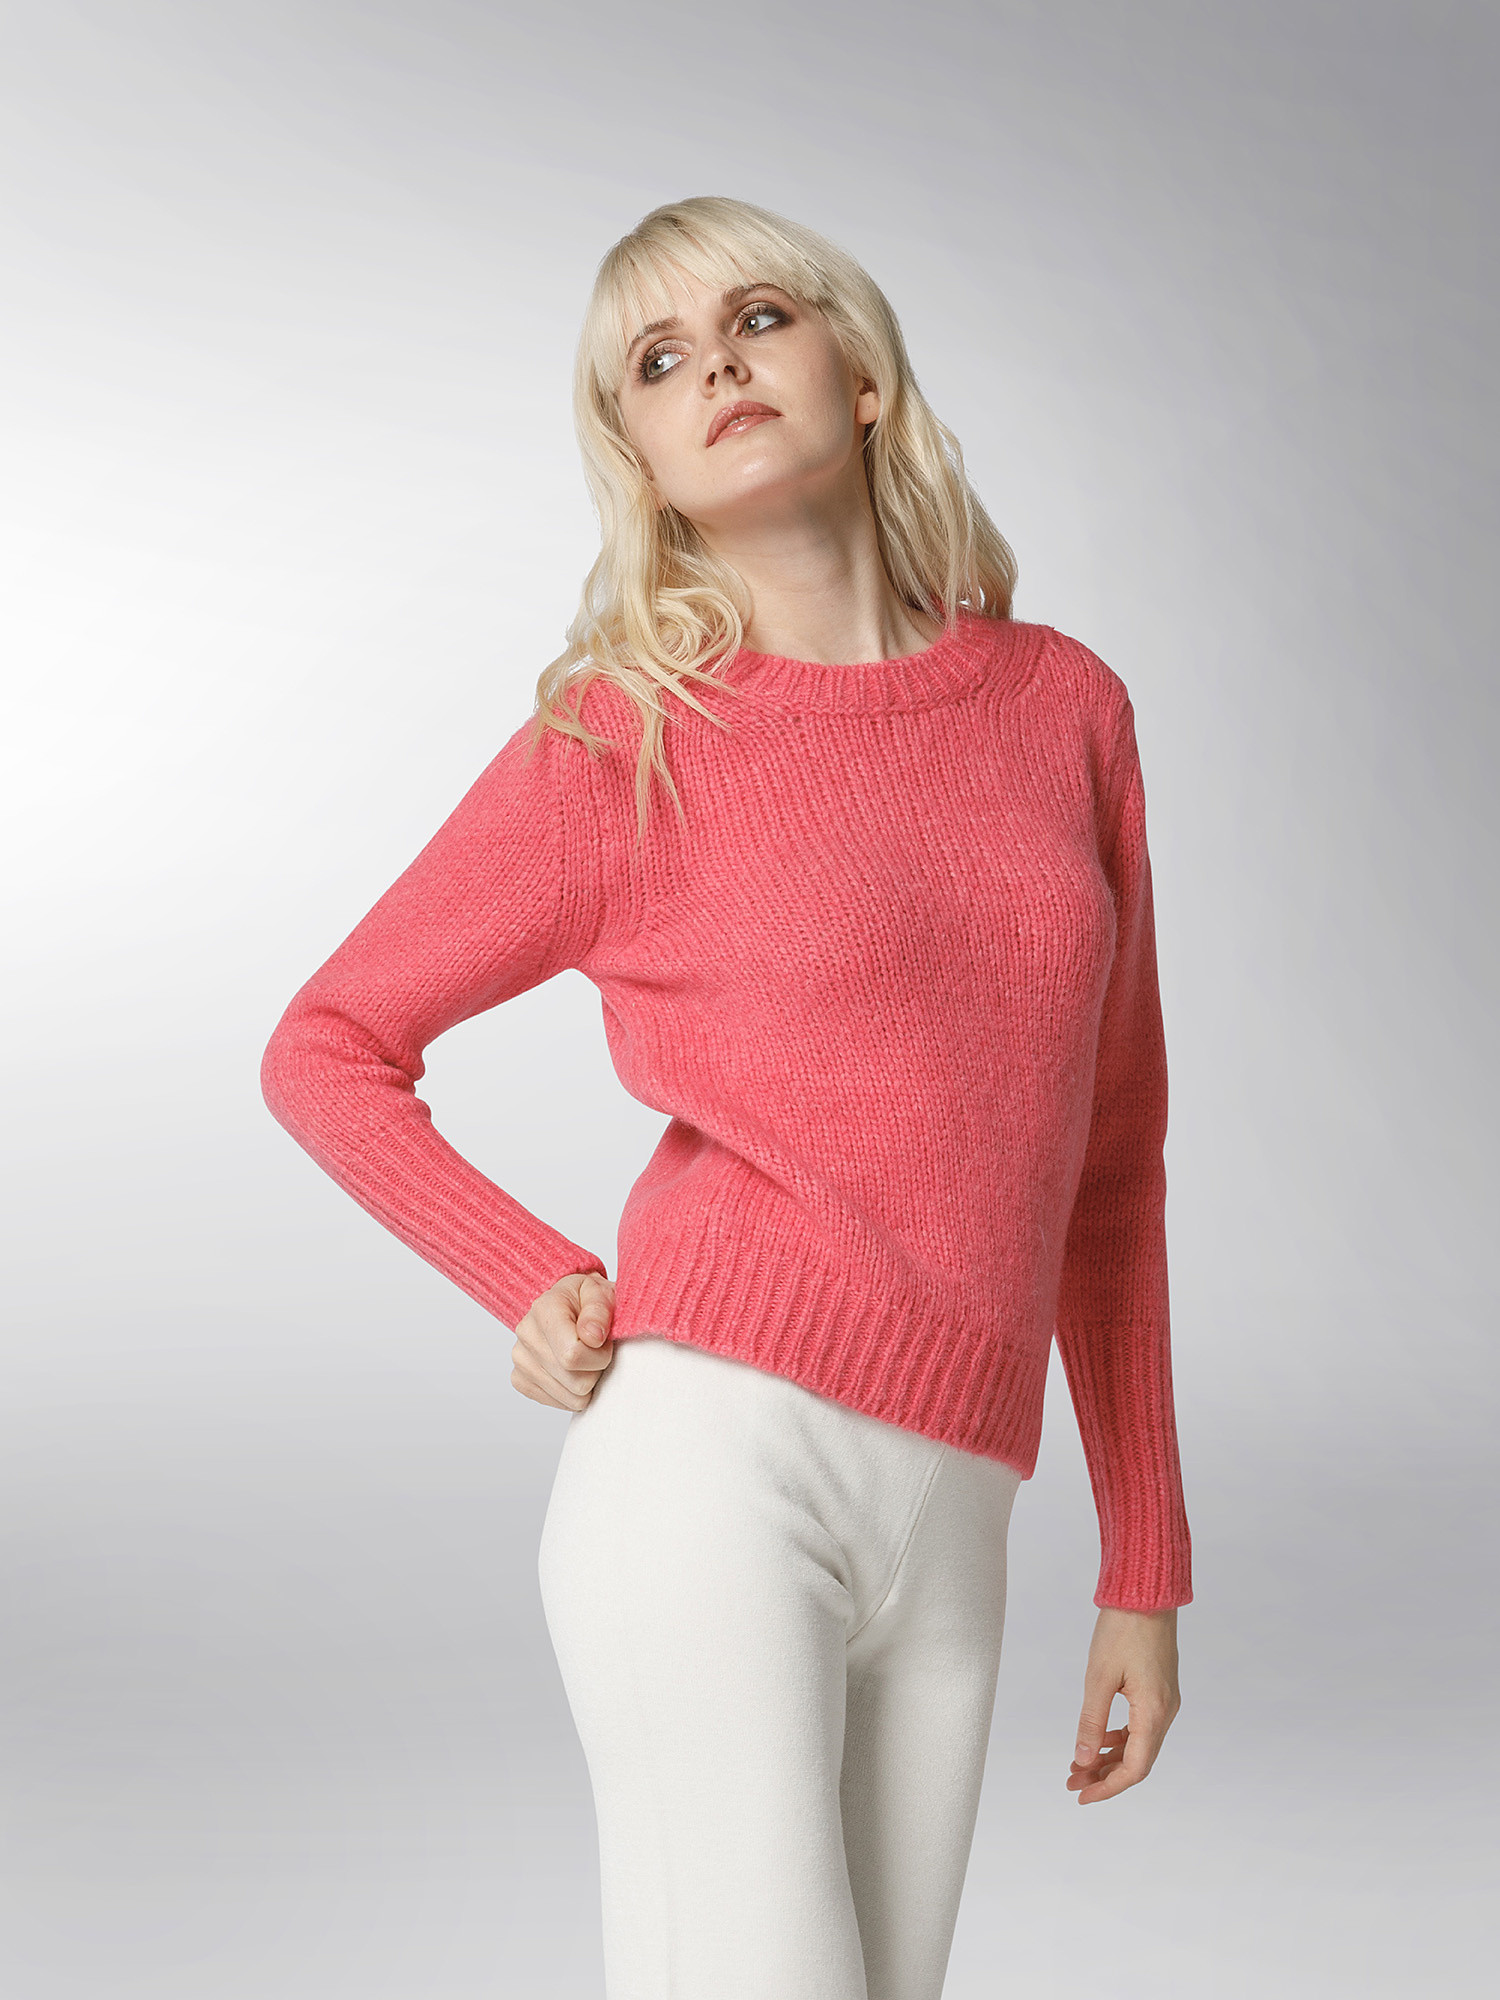 K Collection - Maglia girocollo, Rosa fuxia, large image number 4